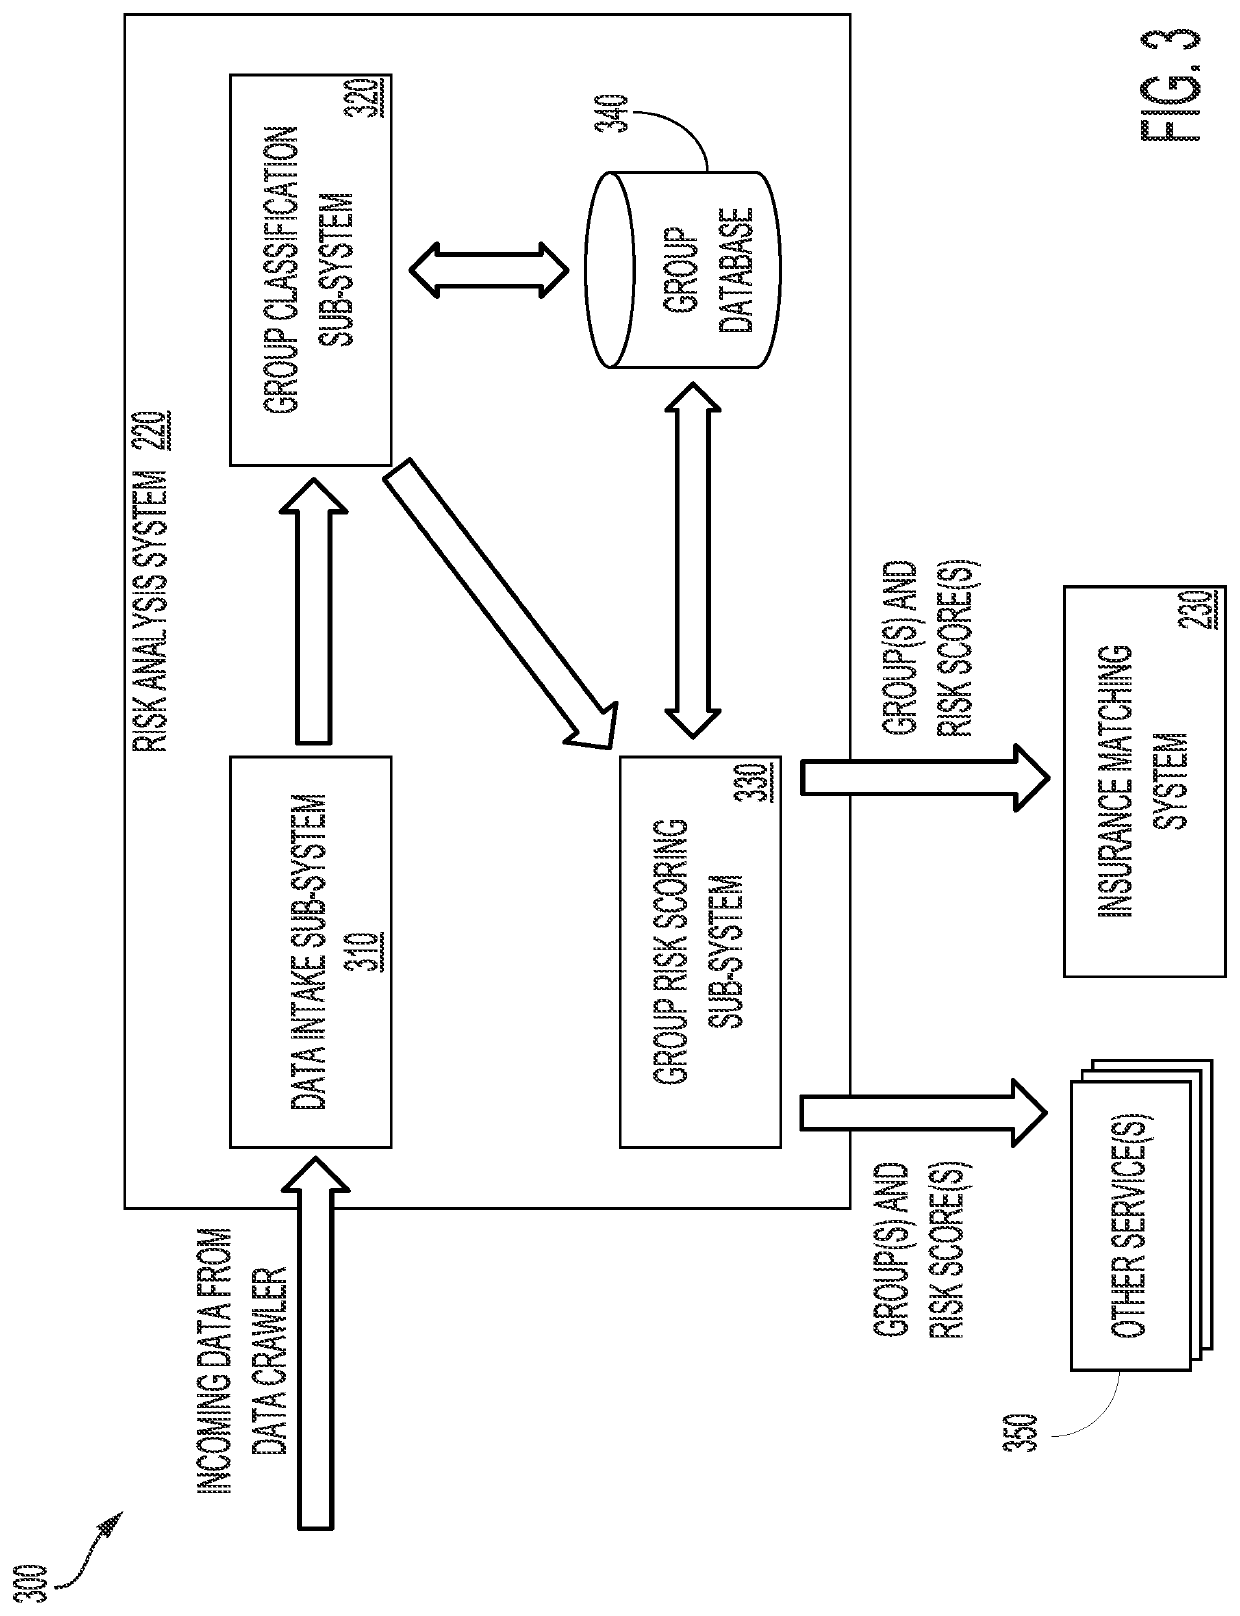 Systems and methods for providing group insurance